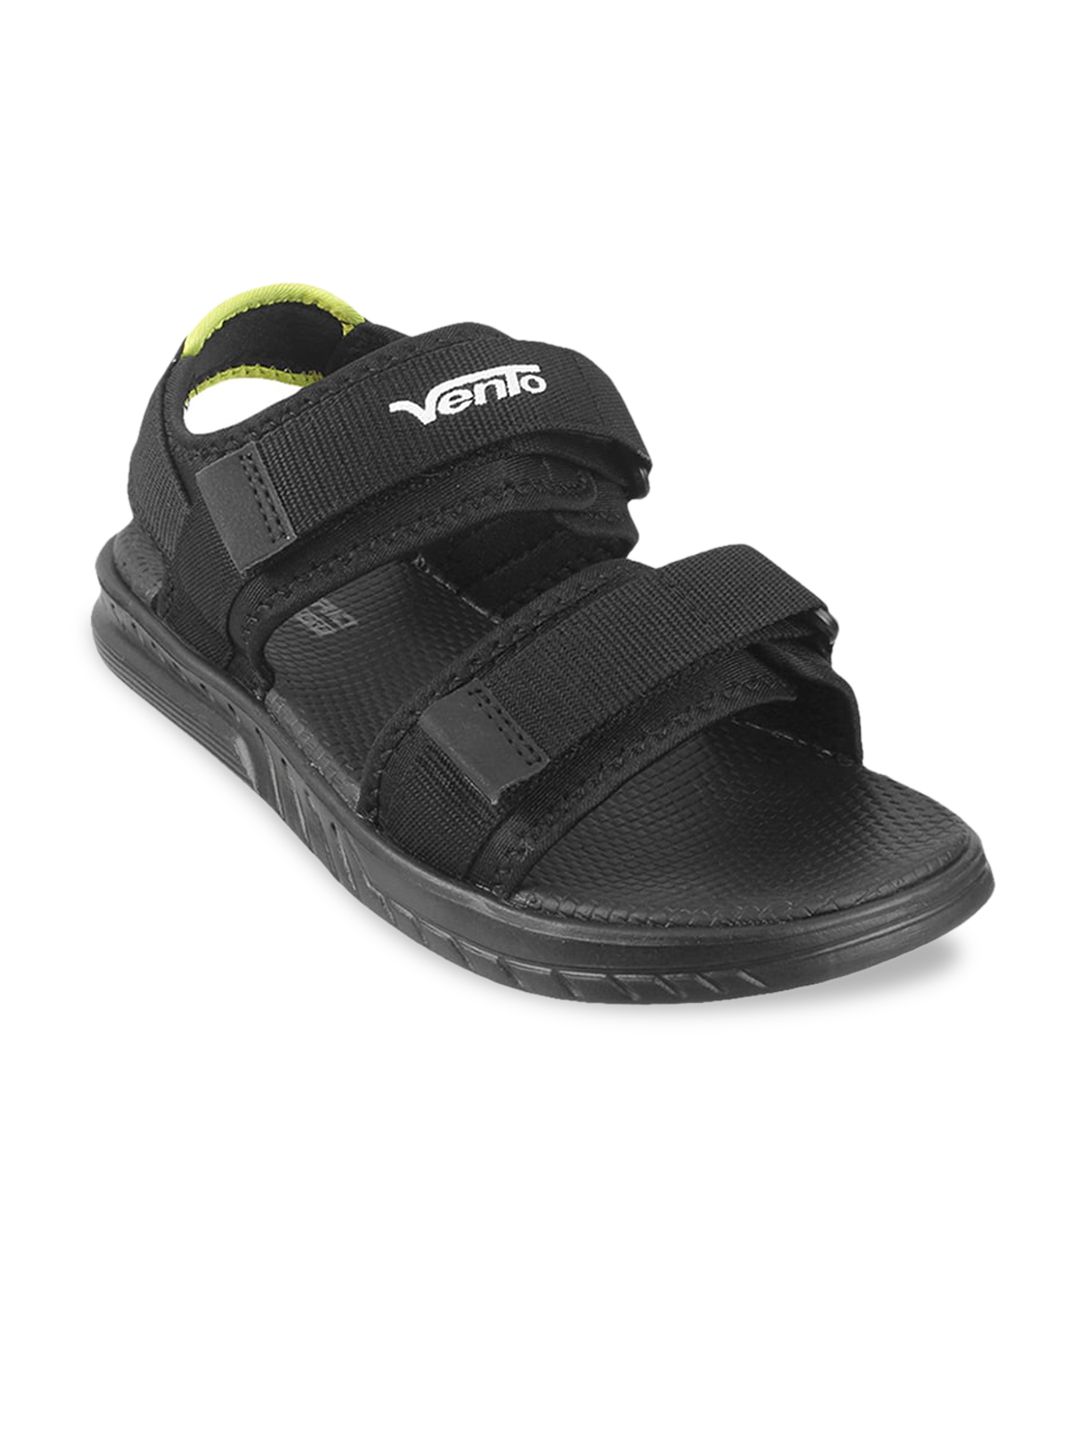 Vento Unisex Black & Green Solid Sports Sandals Price in India